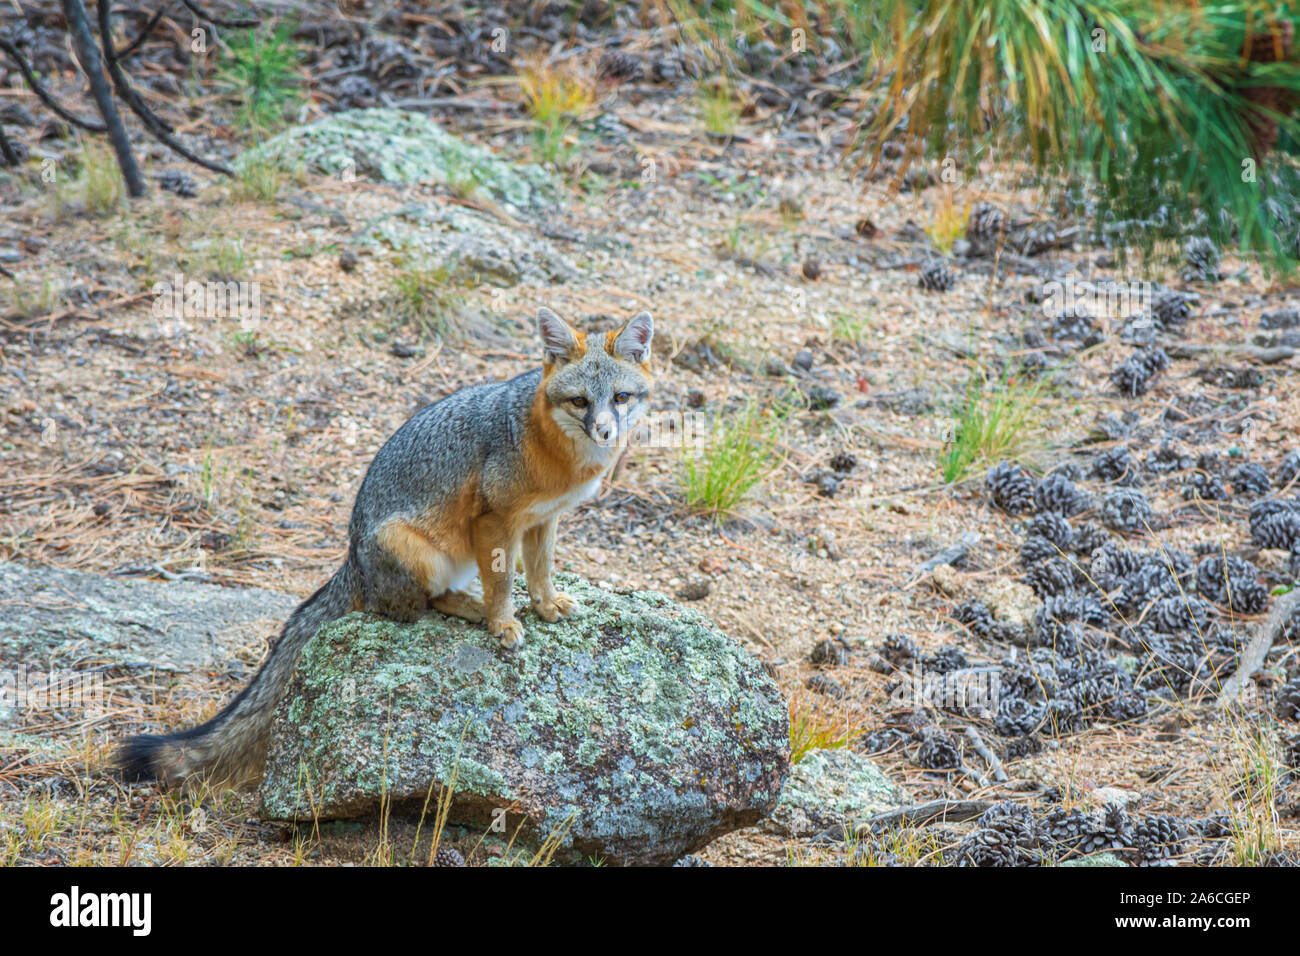 Young Gray Fox or Grey Fox (Urocyon cinereoargenteus) sits on boulder, eyes photographer in Pike National Forest Colorado USA. Photo taken in October. Stock Photo